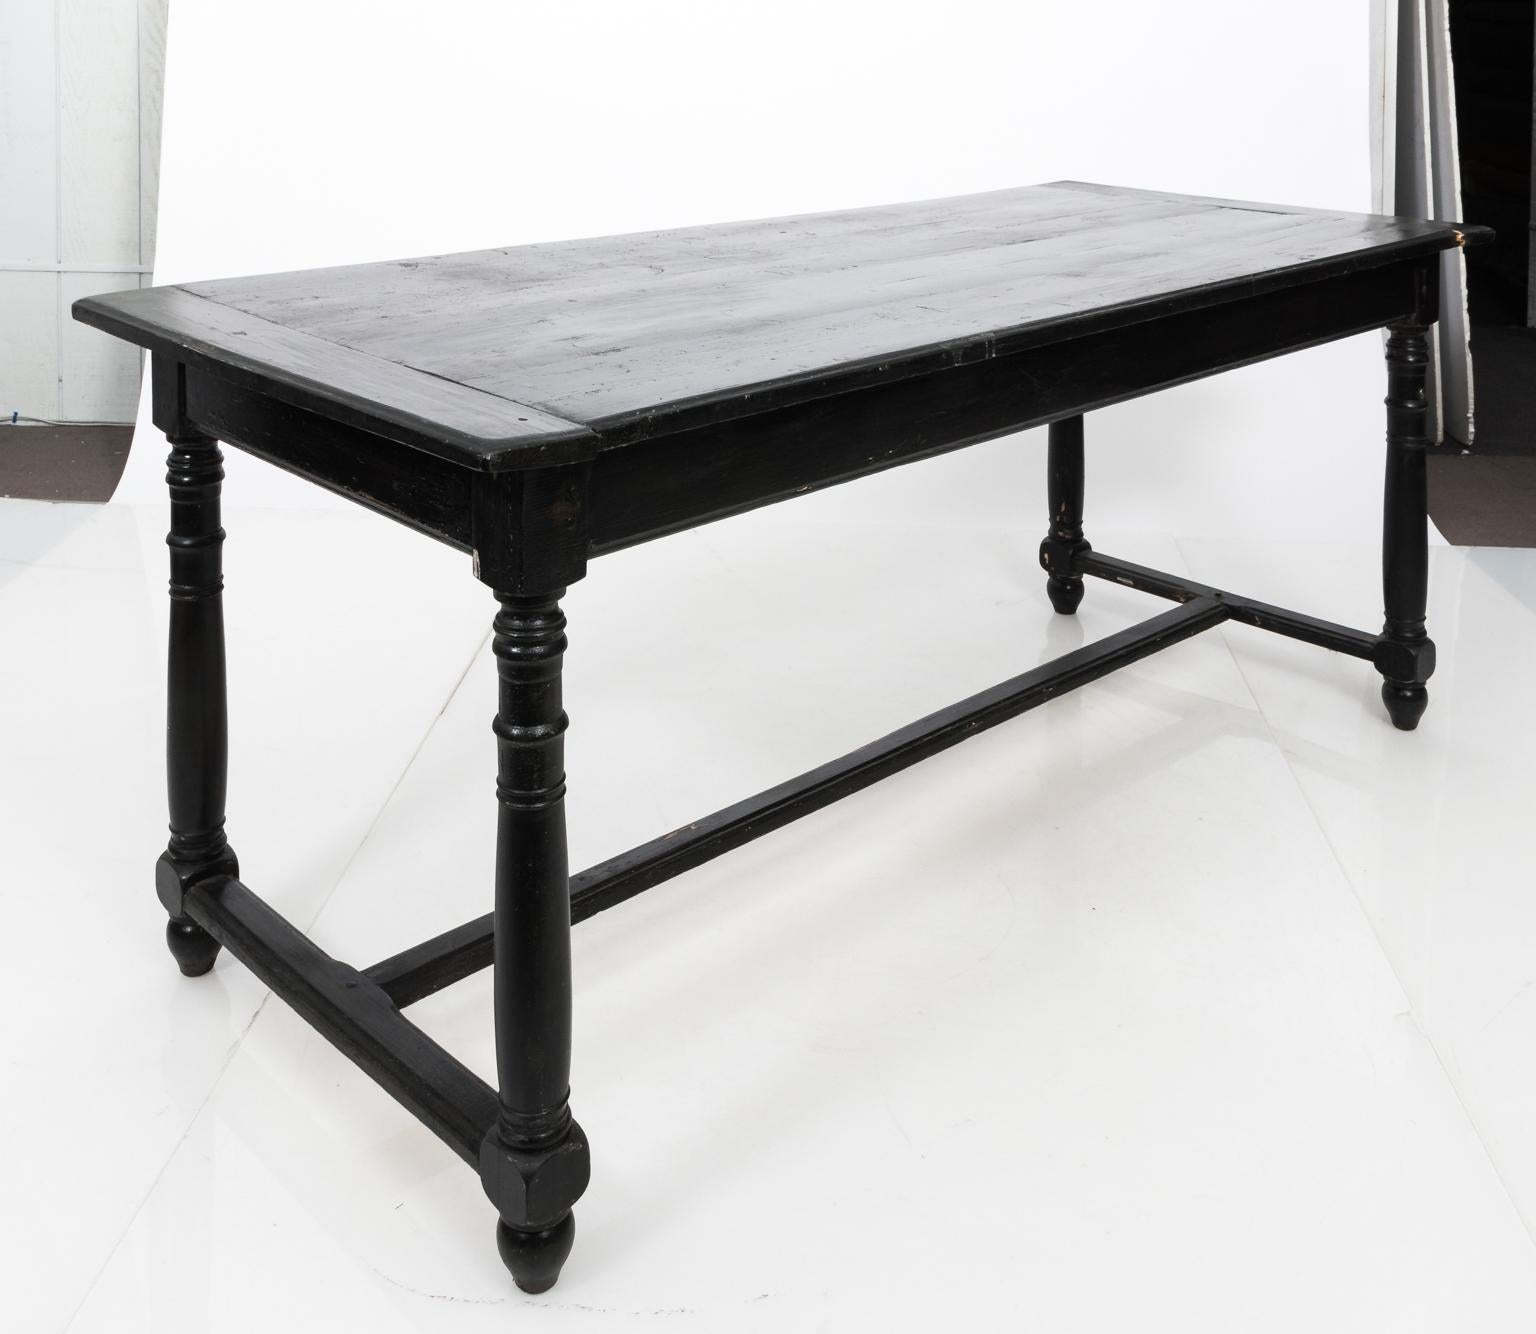 French Provincial Black Painted French Country Dining Table, circa 1870